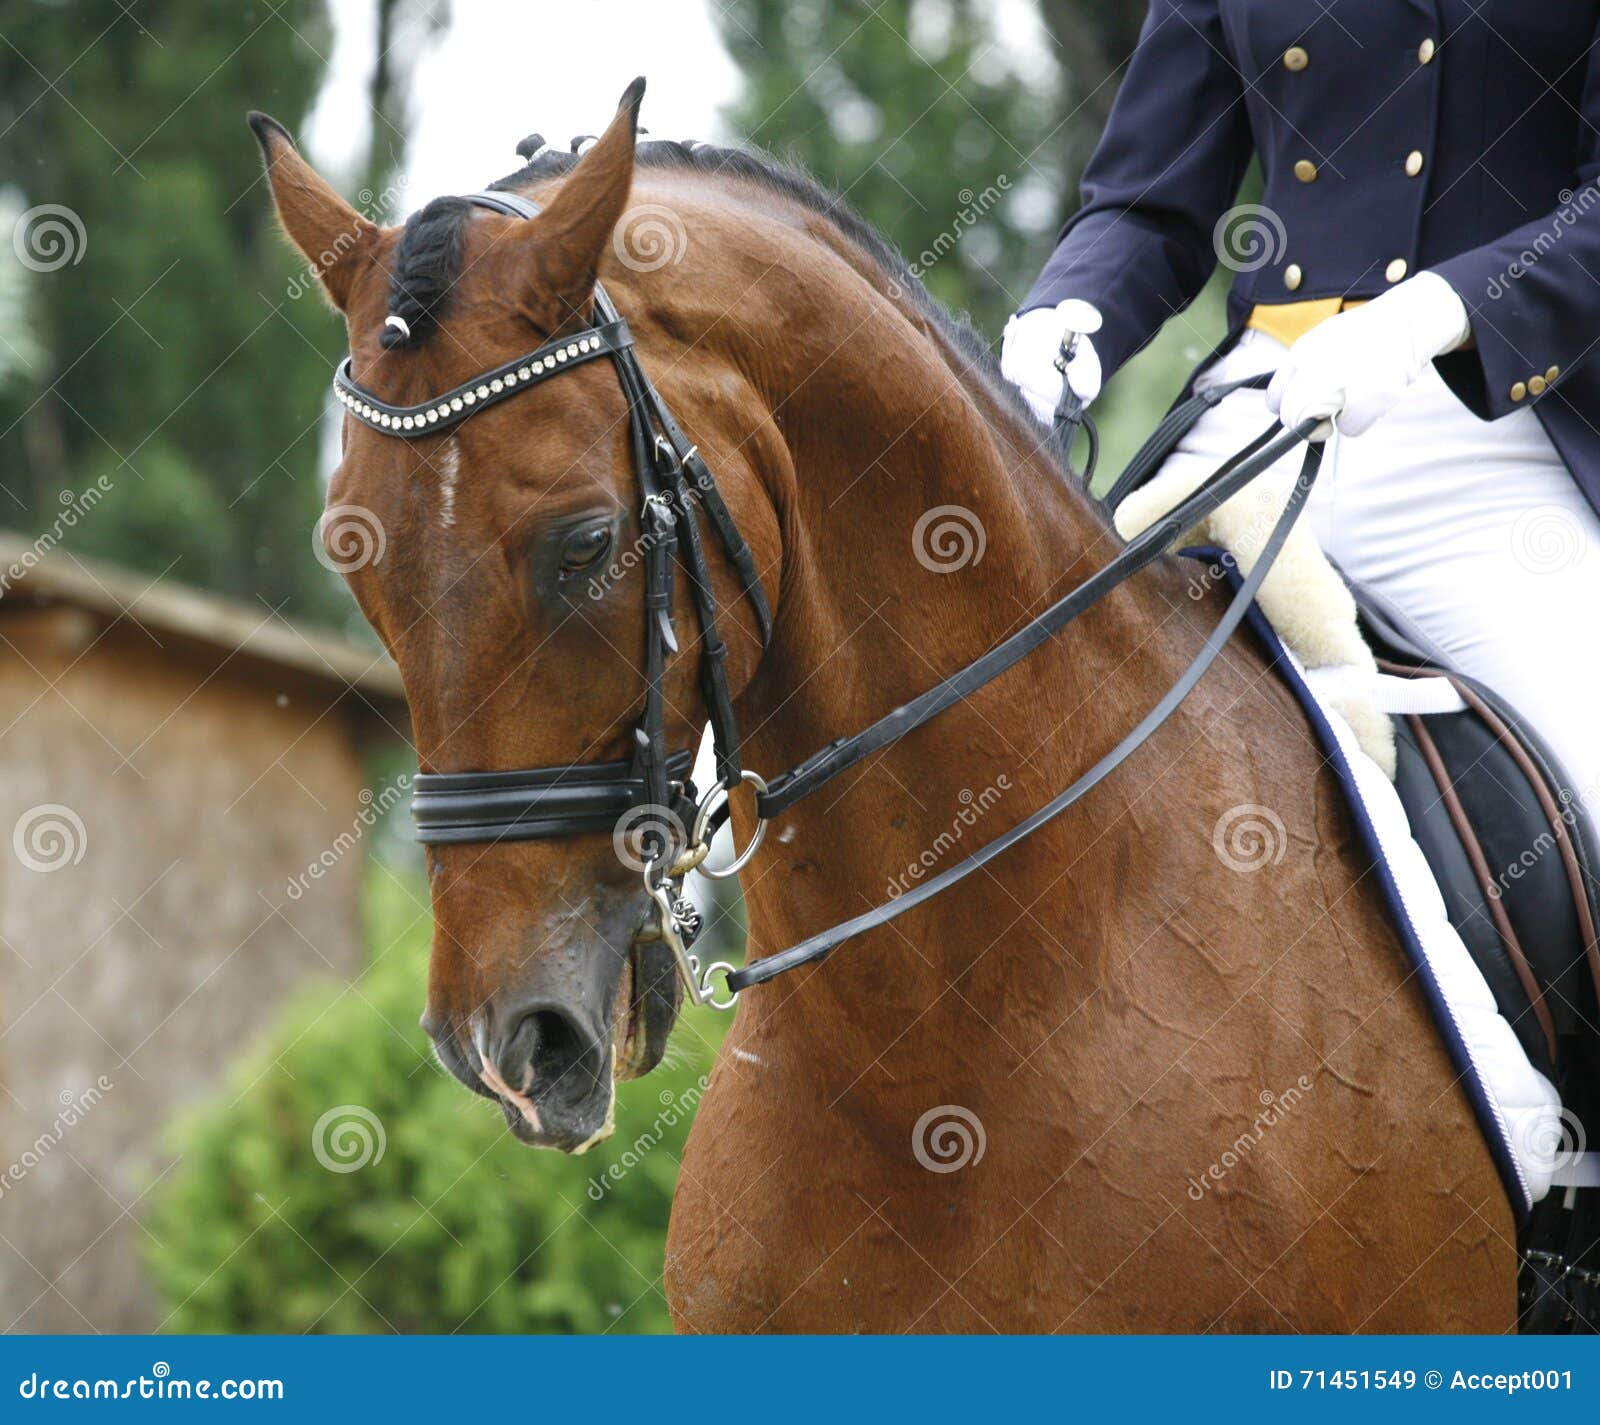 face of a beautiful purebred racehorse on dressage training